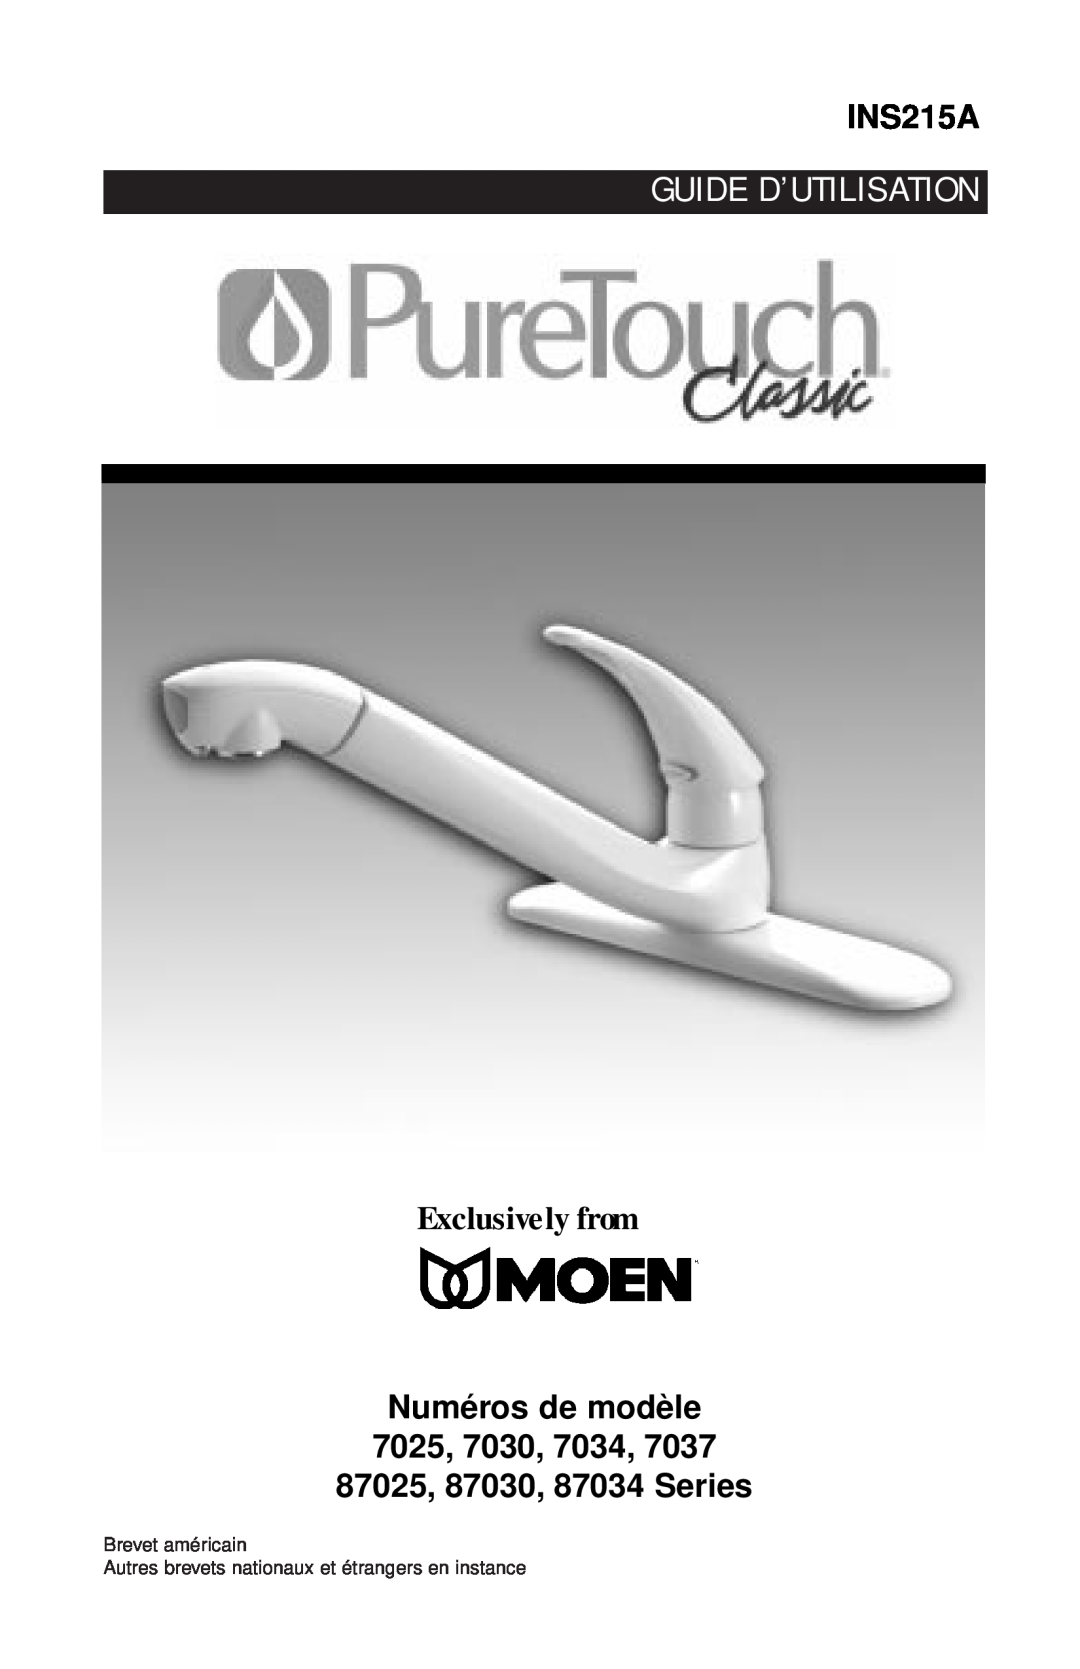 Moen 7037 87025, 87030, 87034 Series owner manual Guide D’Utilisation, INS215A, Exclusively from 